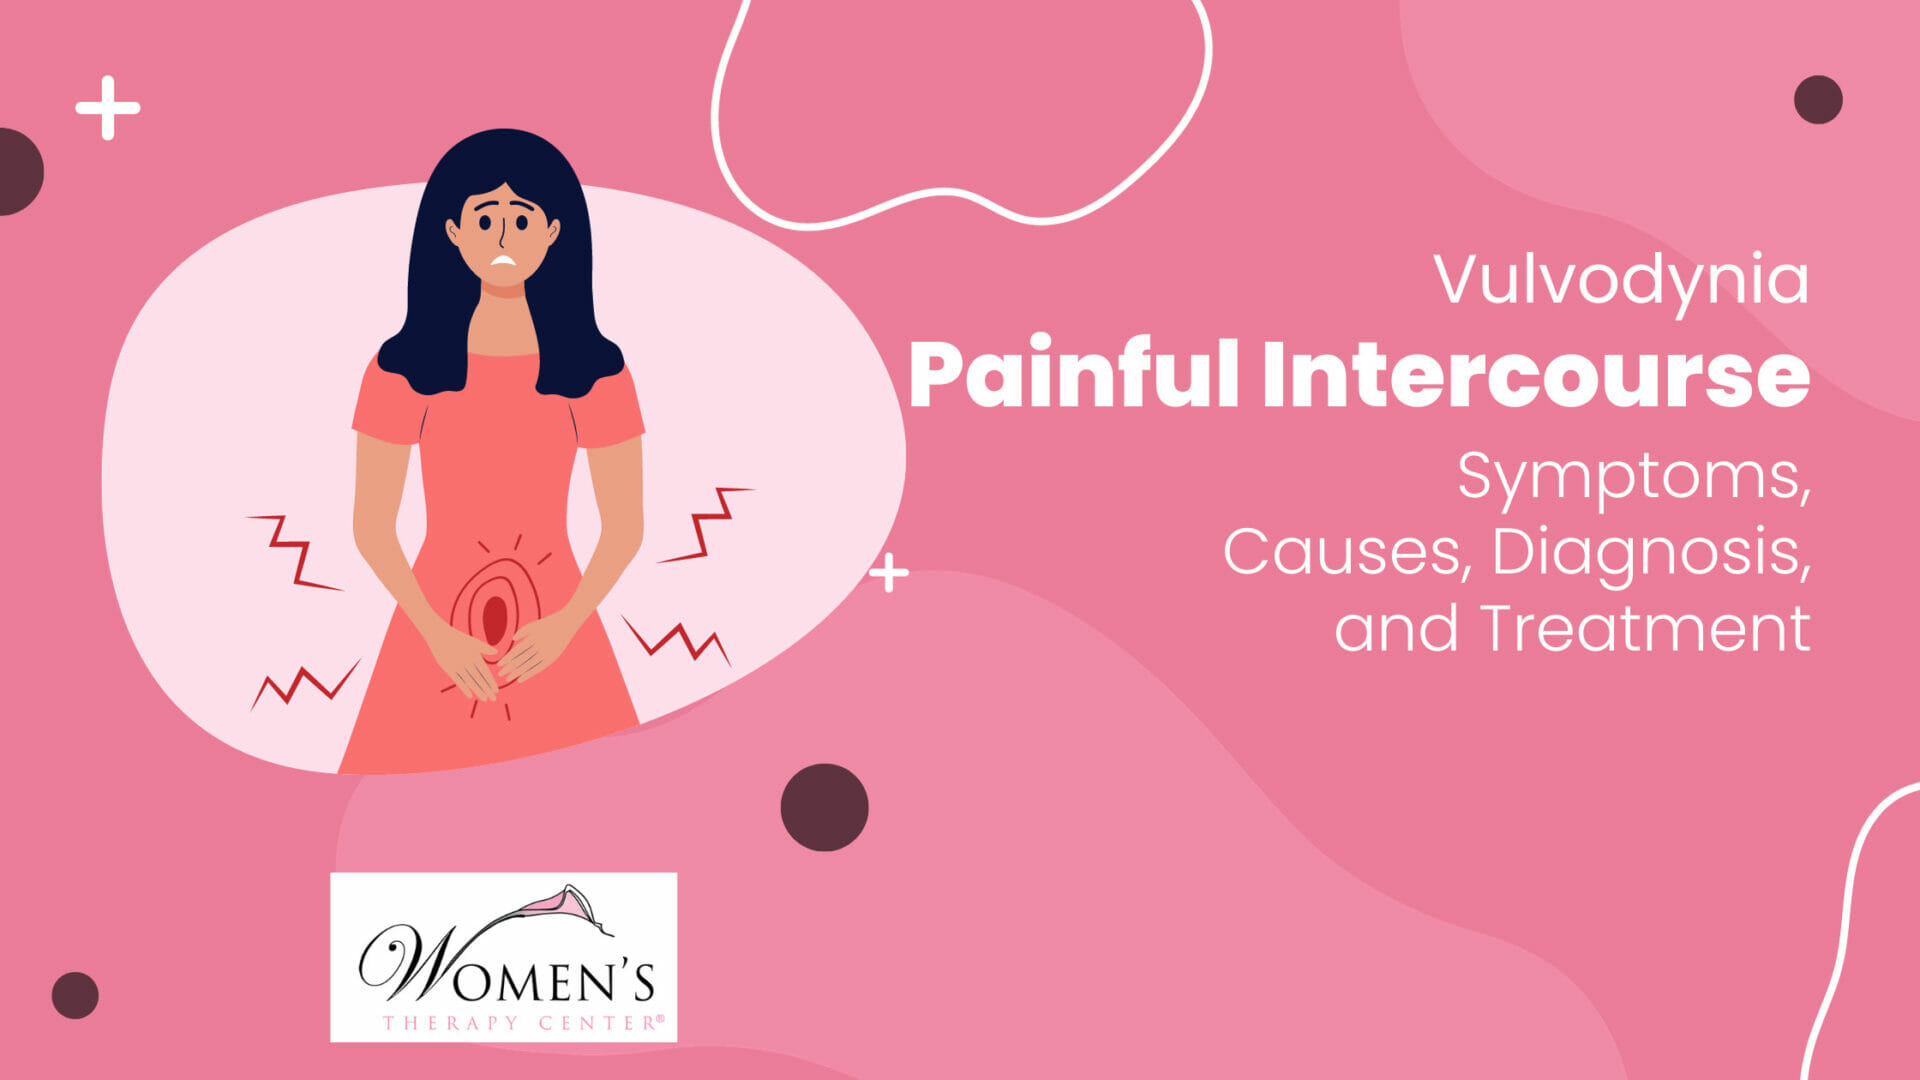 Woman in pain thinking about consulting with women's health center provider about vulvodynia symptoms and treatment options.